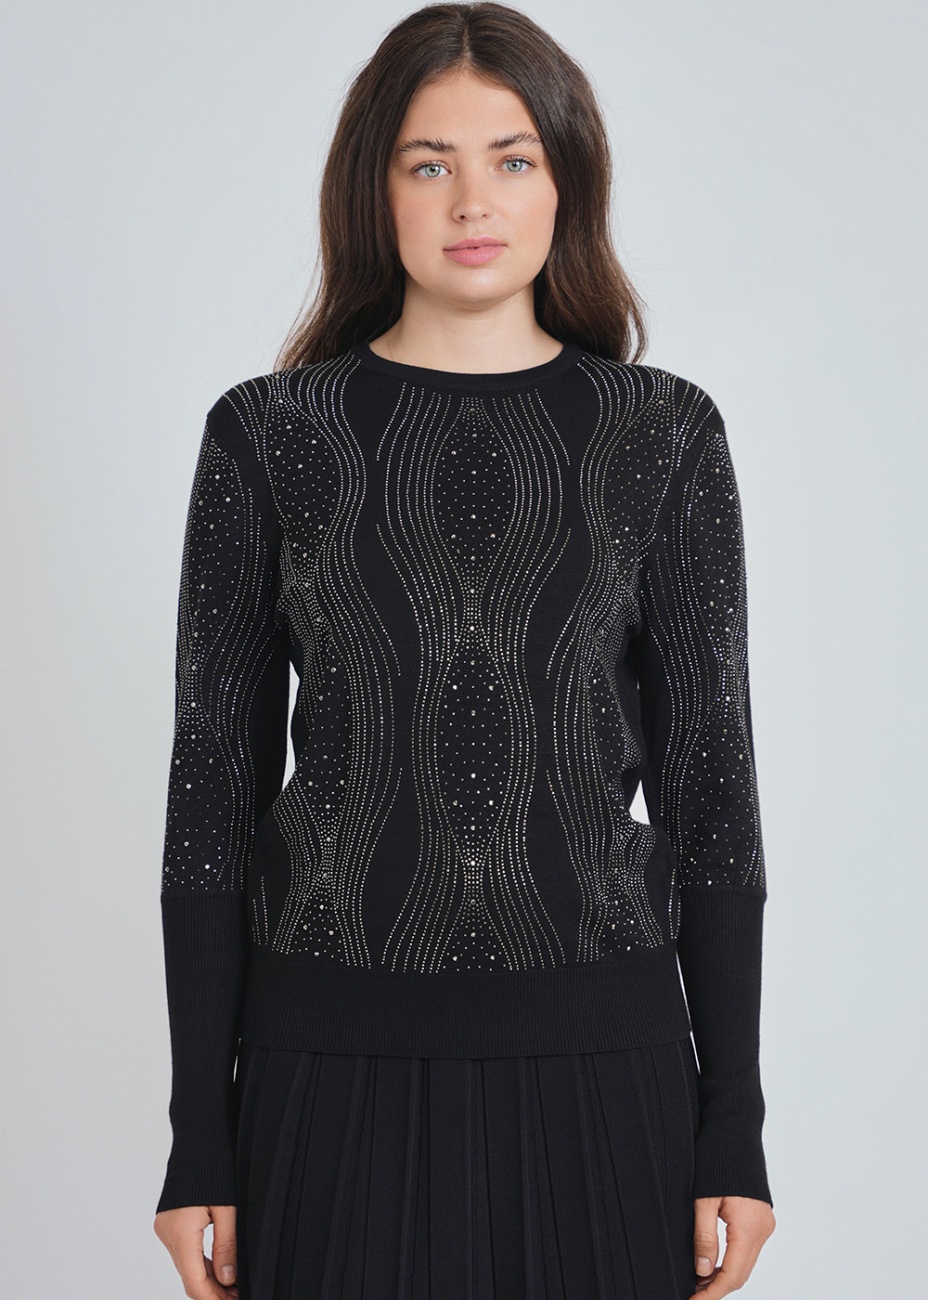 Black Knit Sweater with Radiant Embellishments